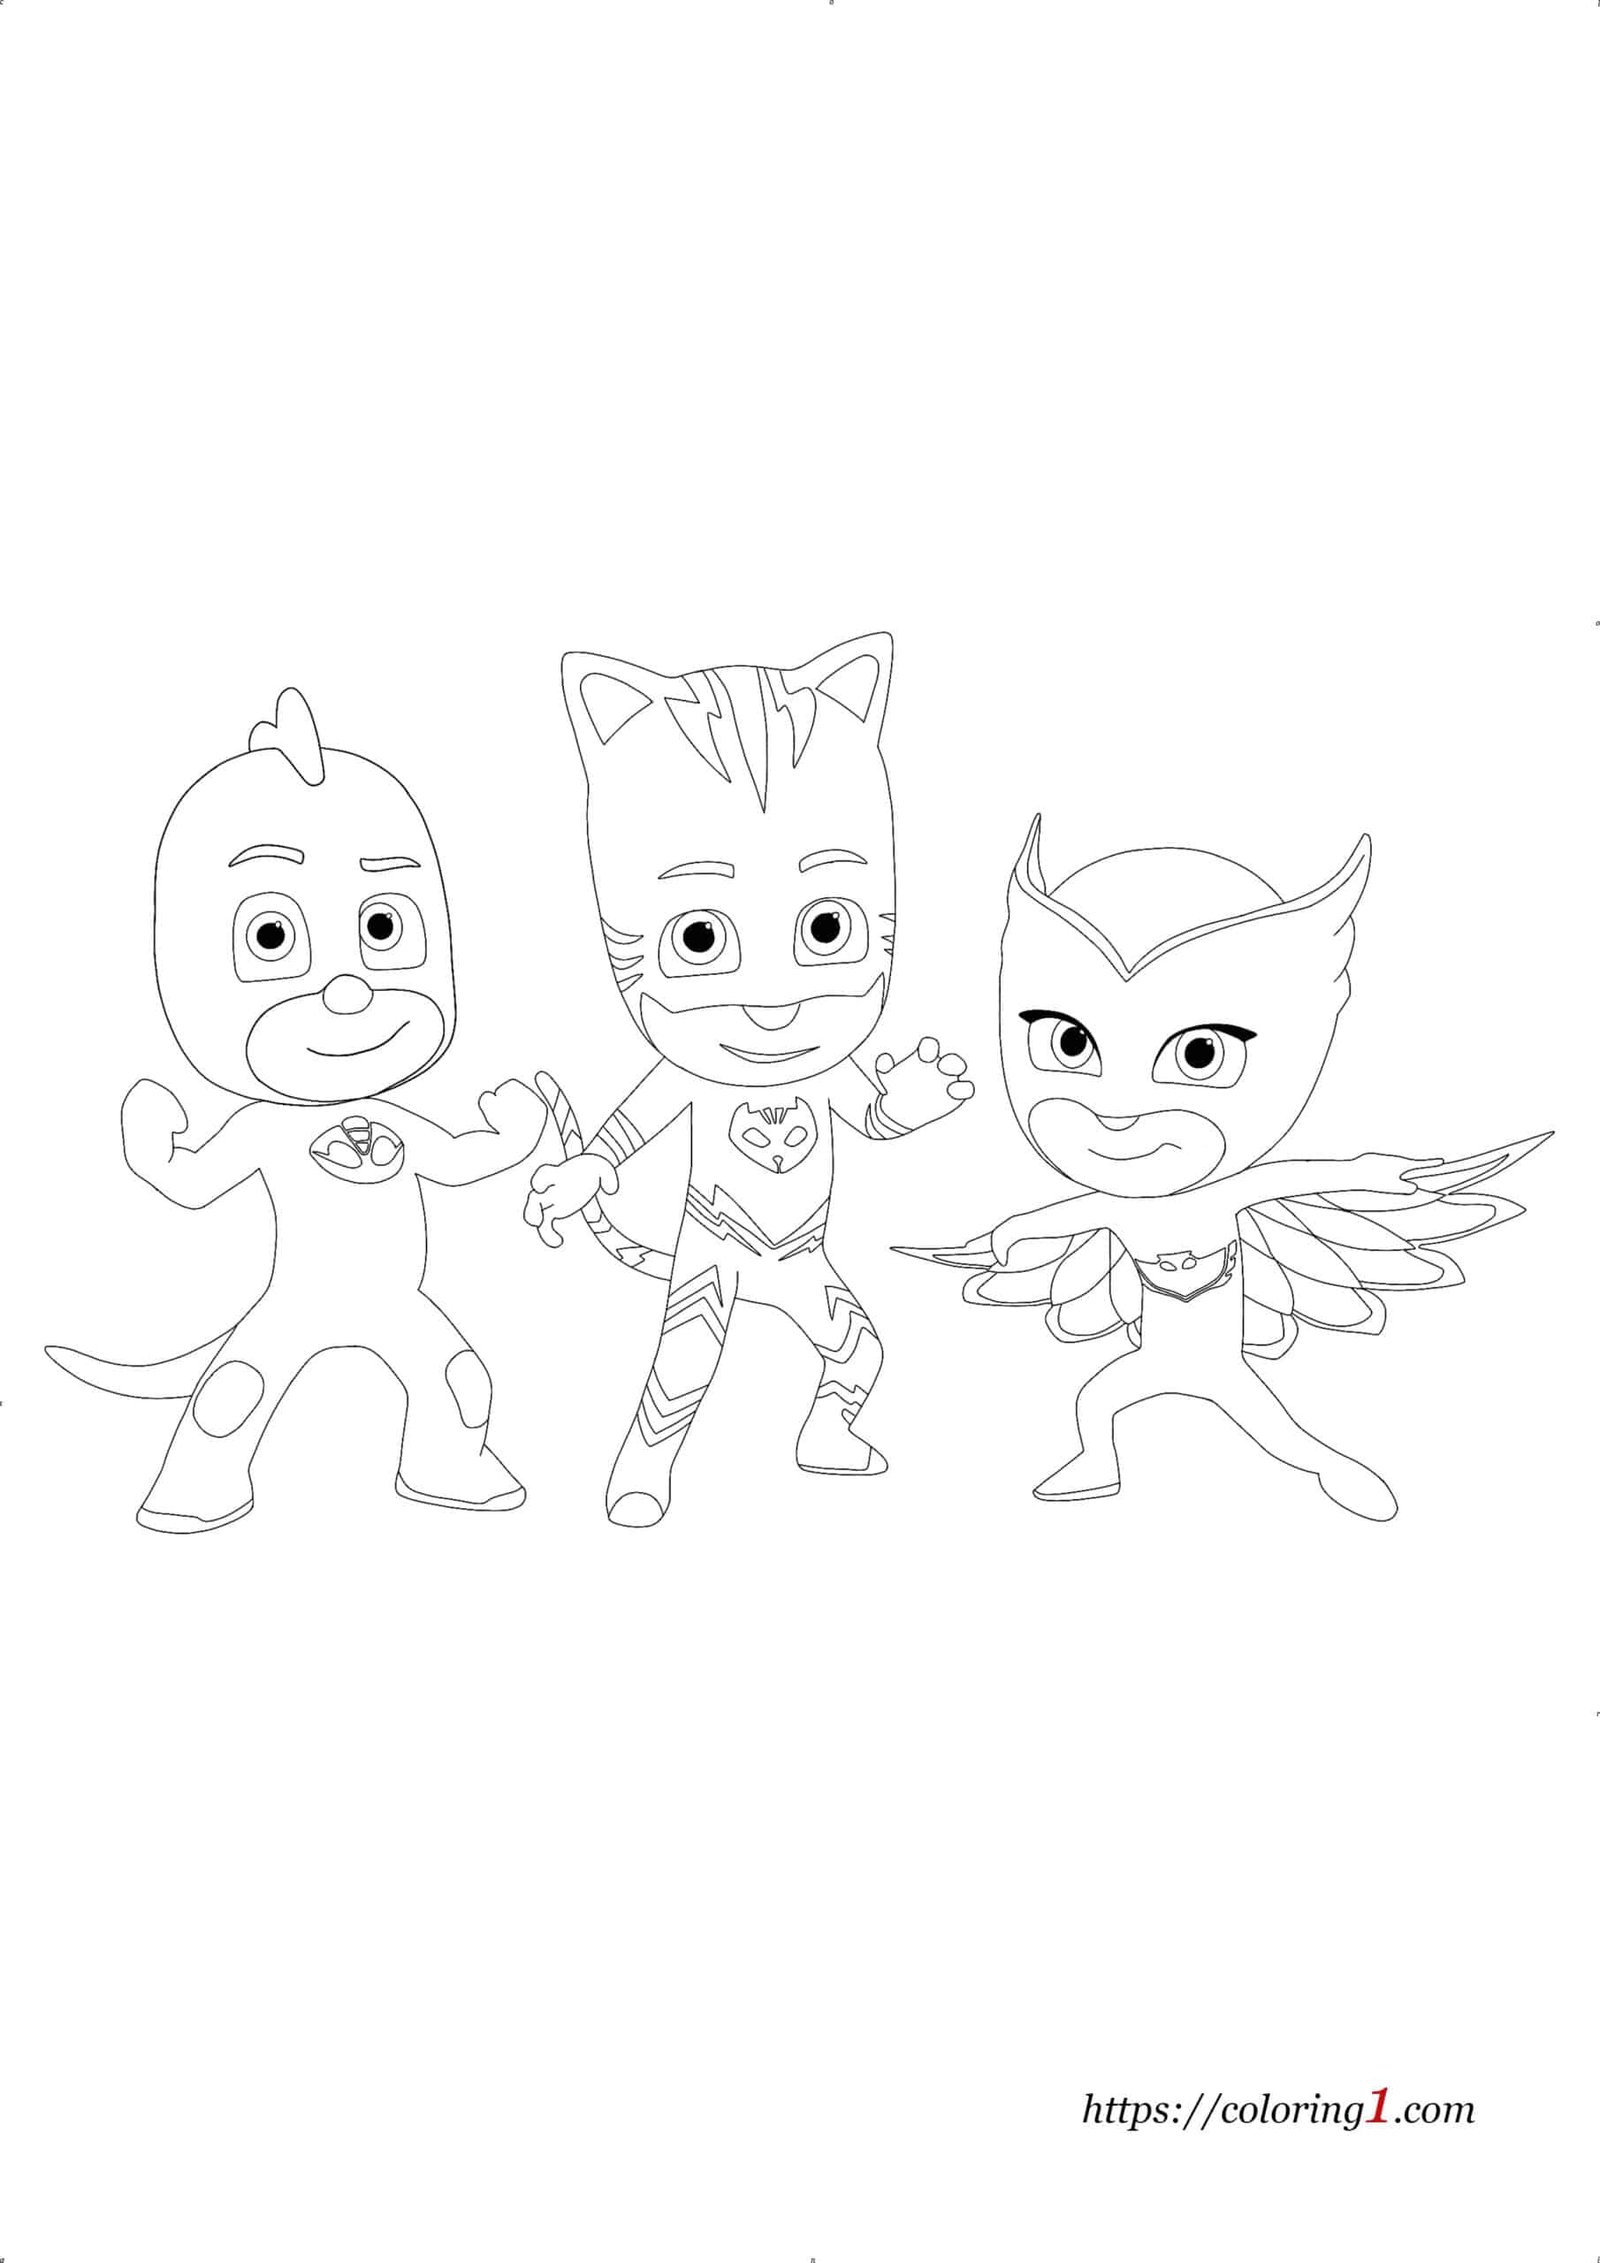 Pj masks characters coloring pages